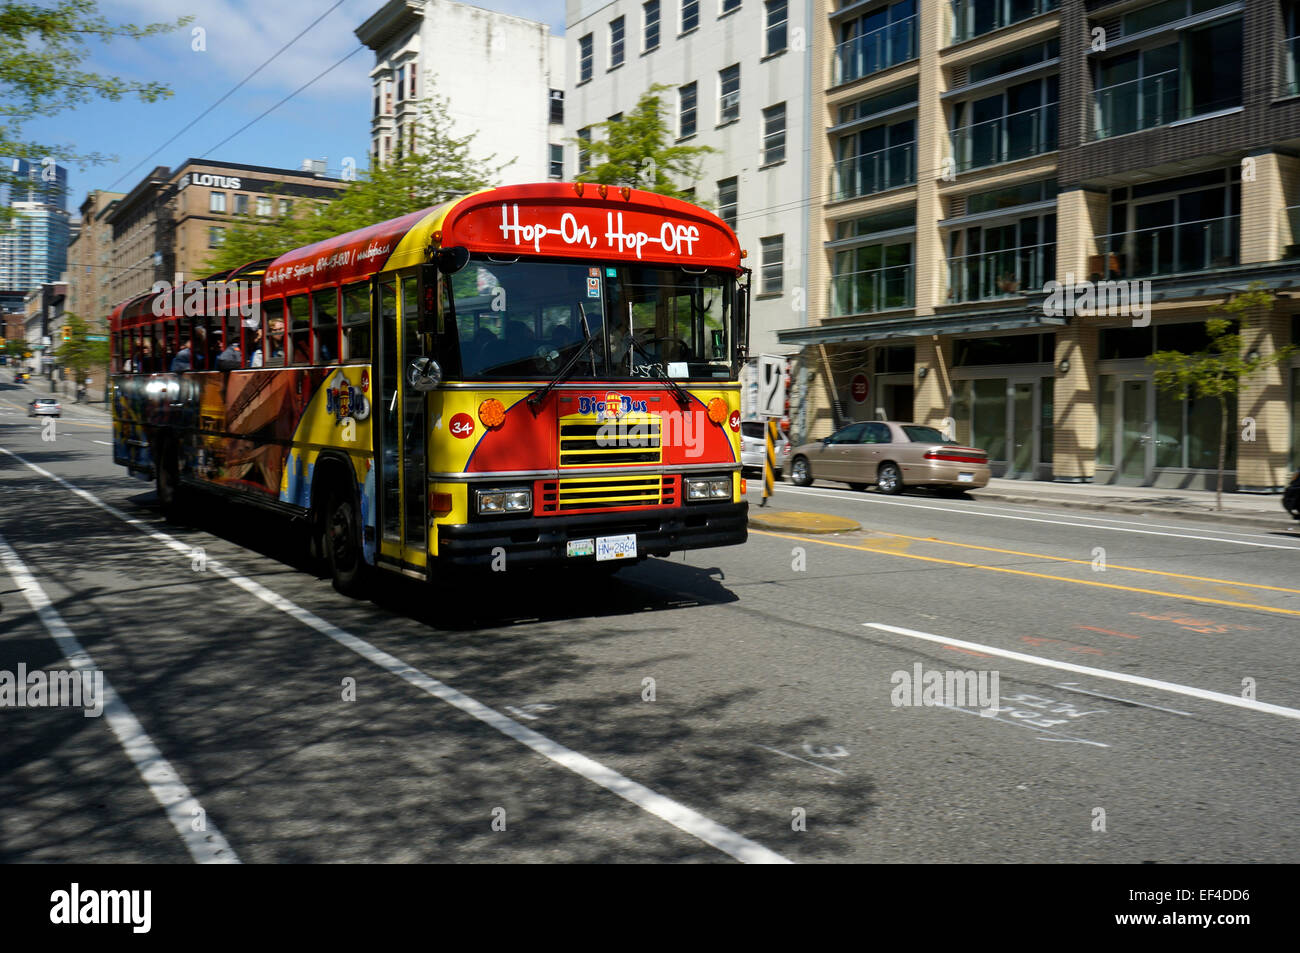 Hop-on, hop-off tour bus on Pender Street, Downtown Eastside, Vancouver, BC, Canada Stock Photo